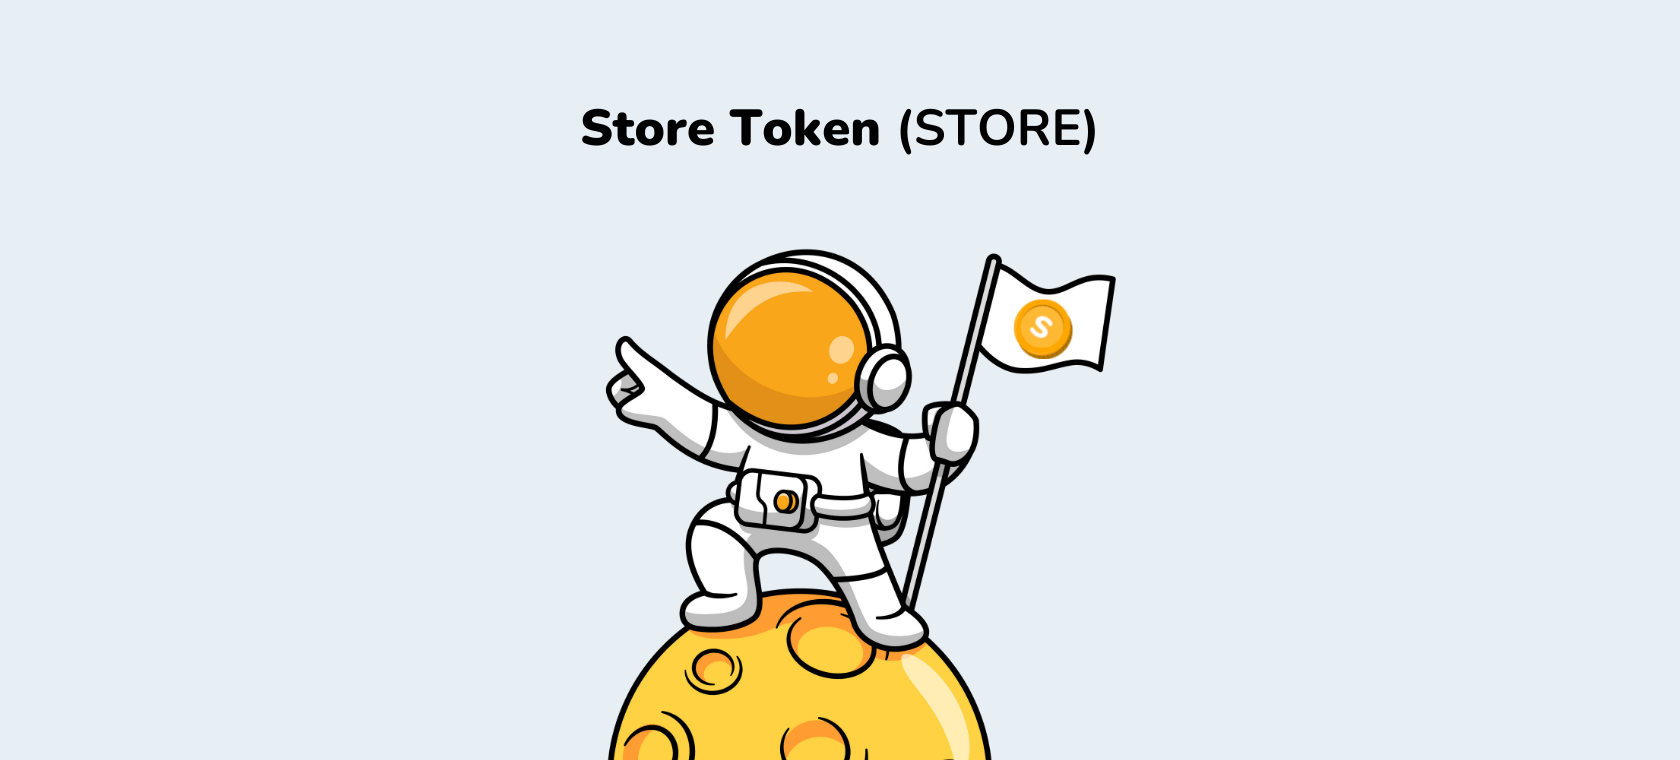 Bitcoin Store introduces Store Token (STORE)